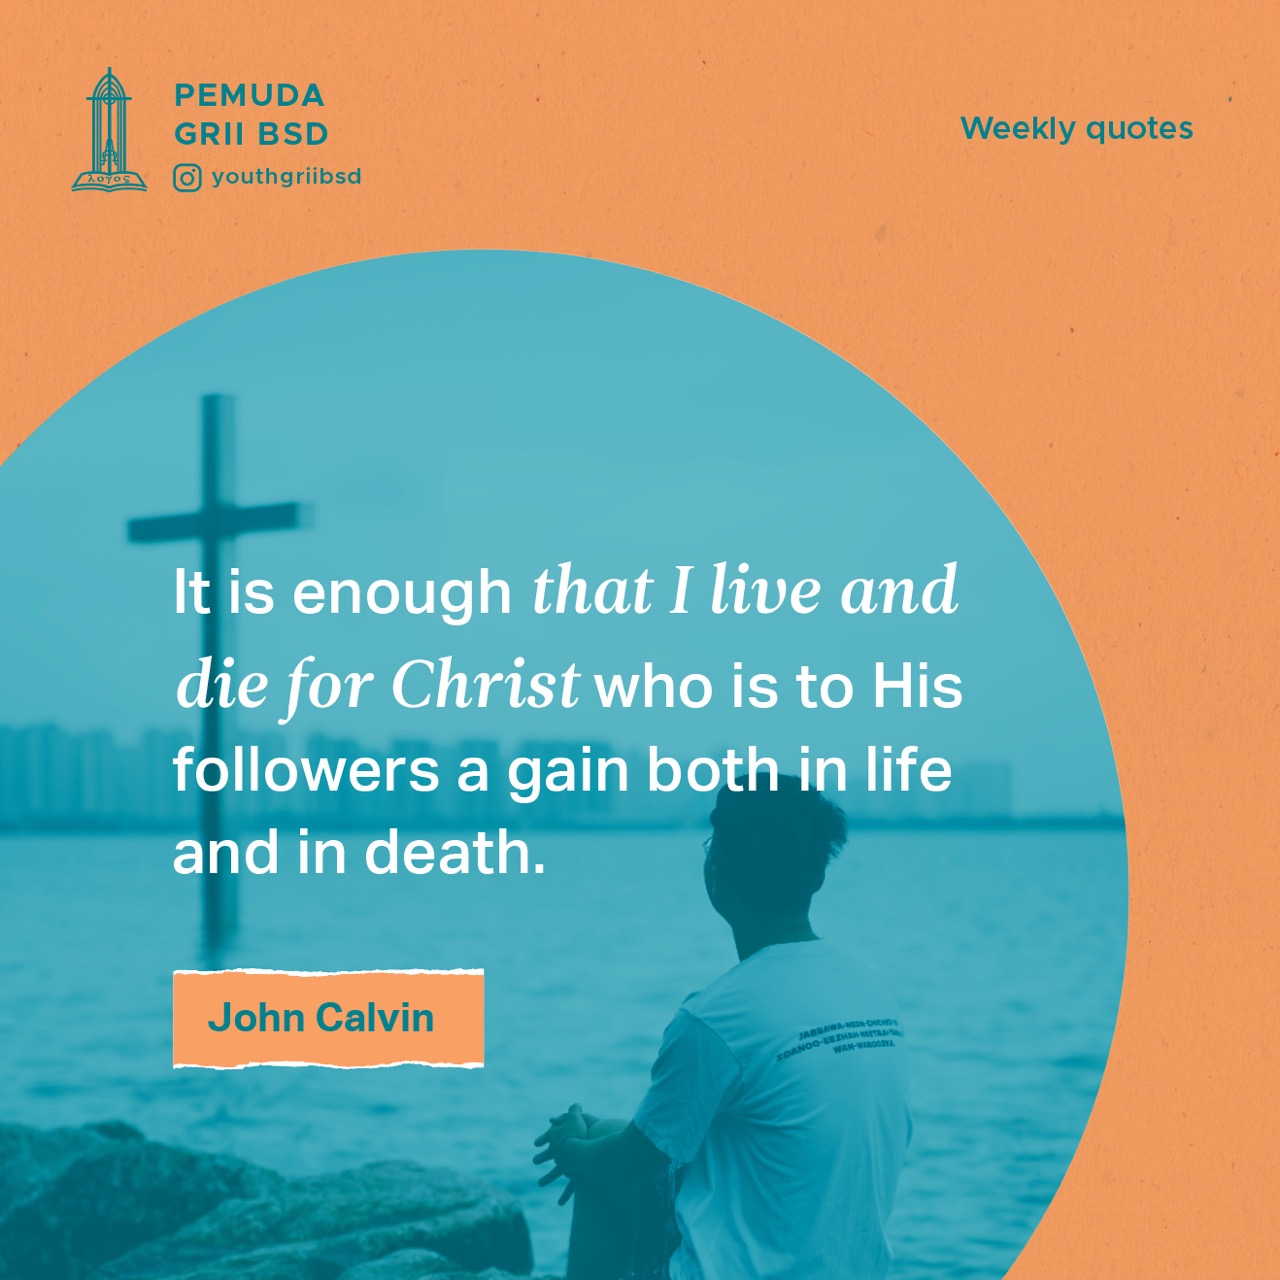 It is enough that I live and die for Christ who is to His followers a gain both in life and in death.